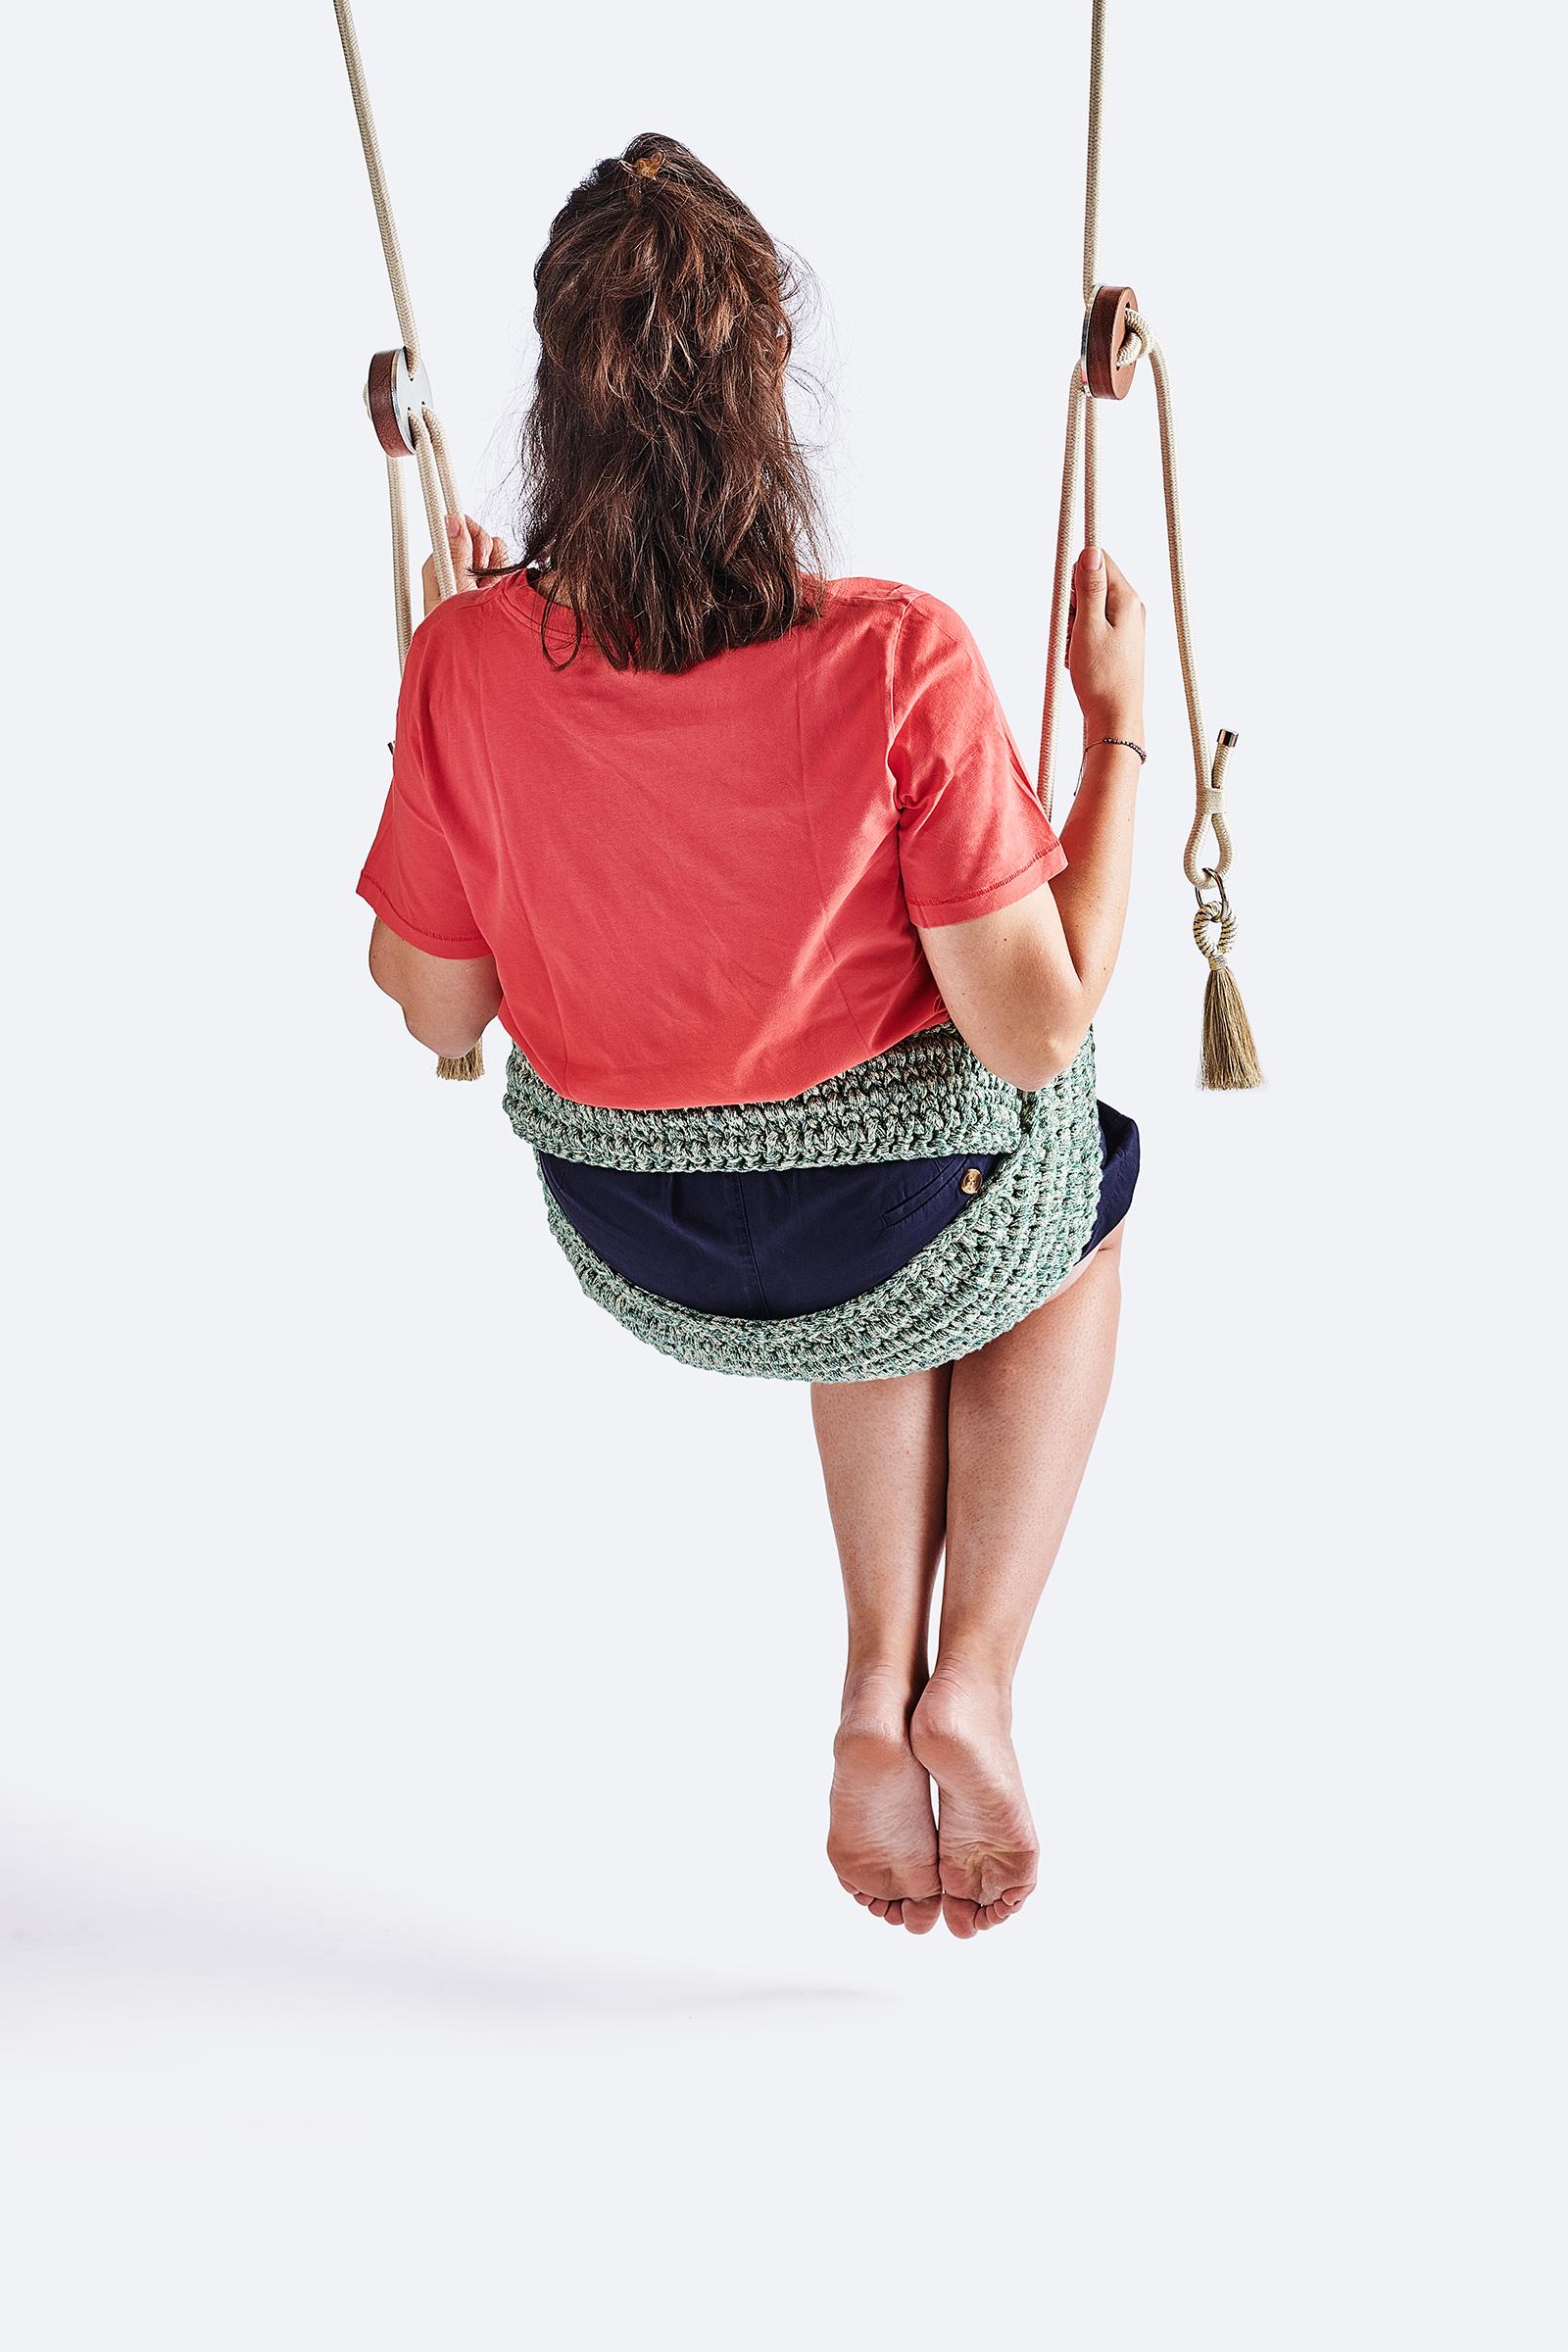 The IOTA Saddle Swings are lightweight and compact. They are good for enjoying the outdoors and kids love them too. You can easily take the hammock like swing with you to hang during camping trips. The swings are handmade from a signature yarn